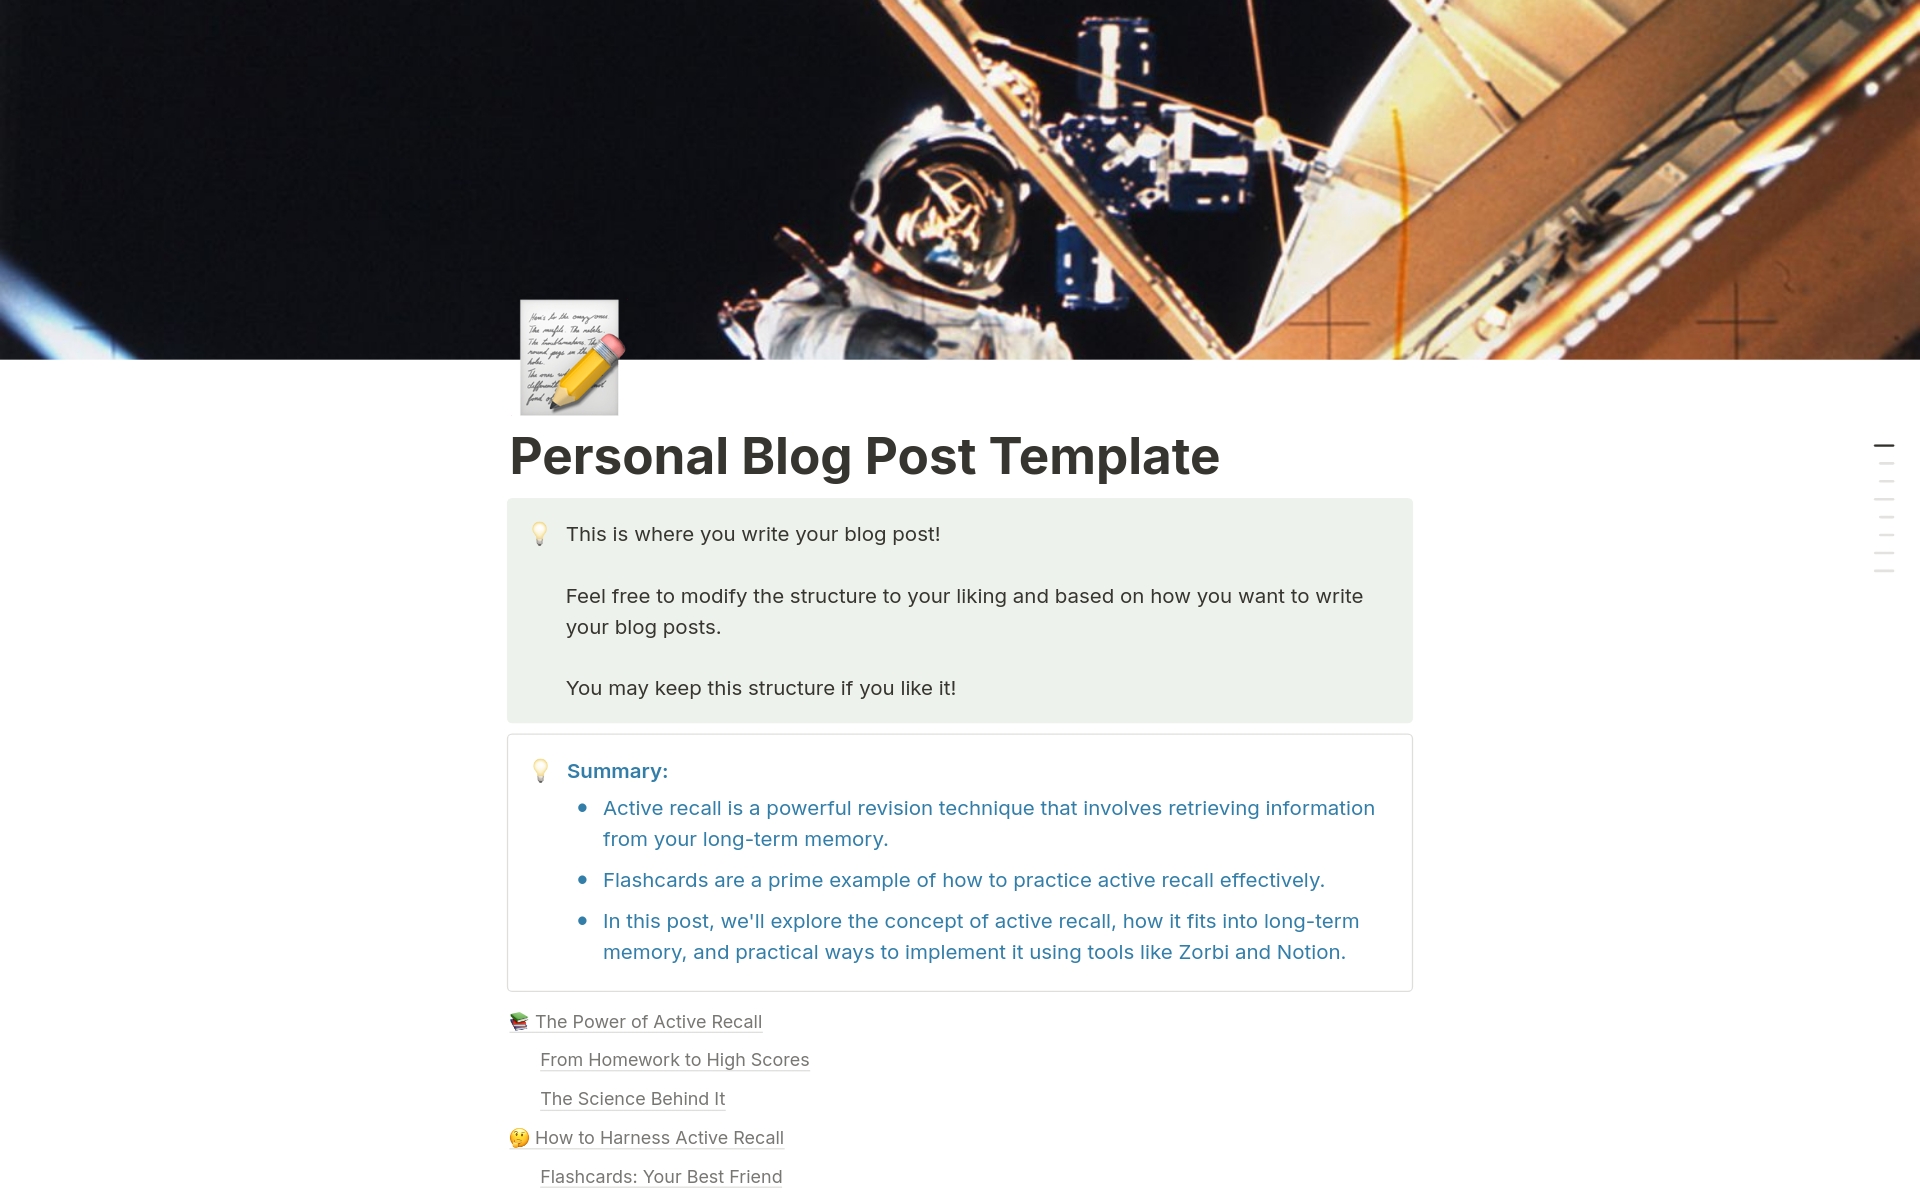 Elevate your blog with the Personal Blog Post Template on Notion. Craft engaging posts using structured tips and active recall strategies. Ideal for bloggers seeking a professional yet personalized touch. Enhance, edit, and publish with ease.